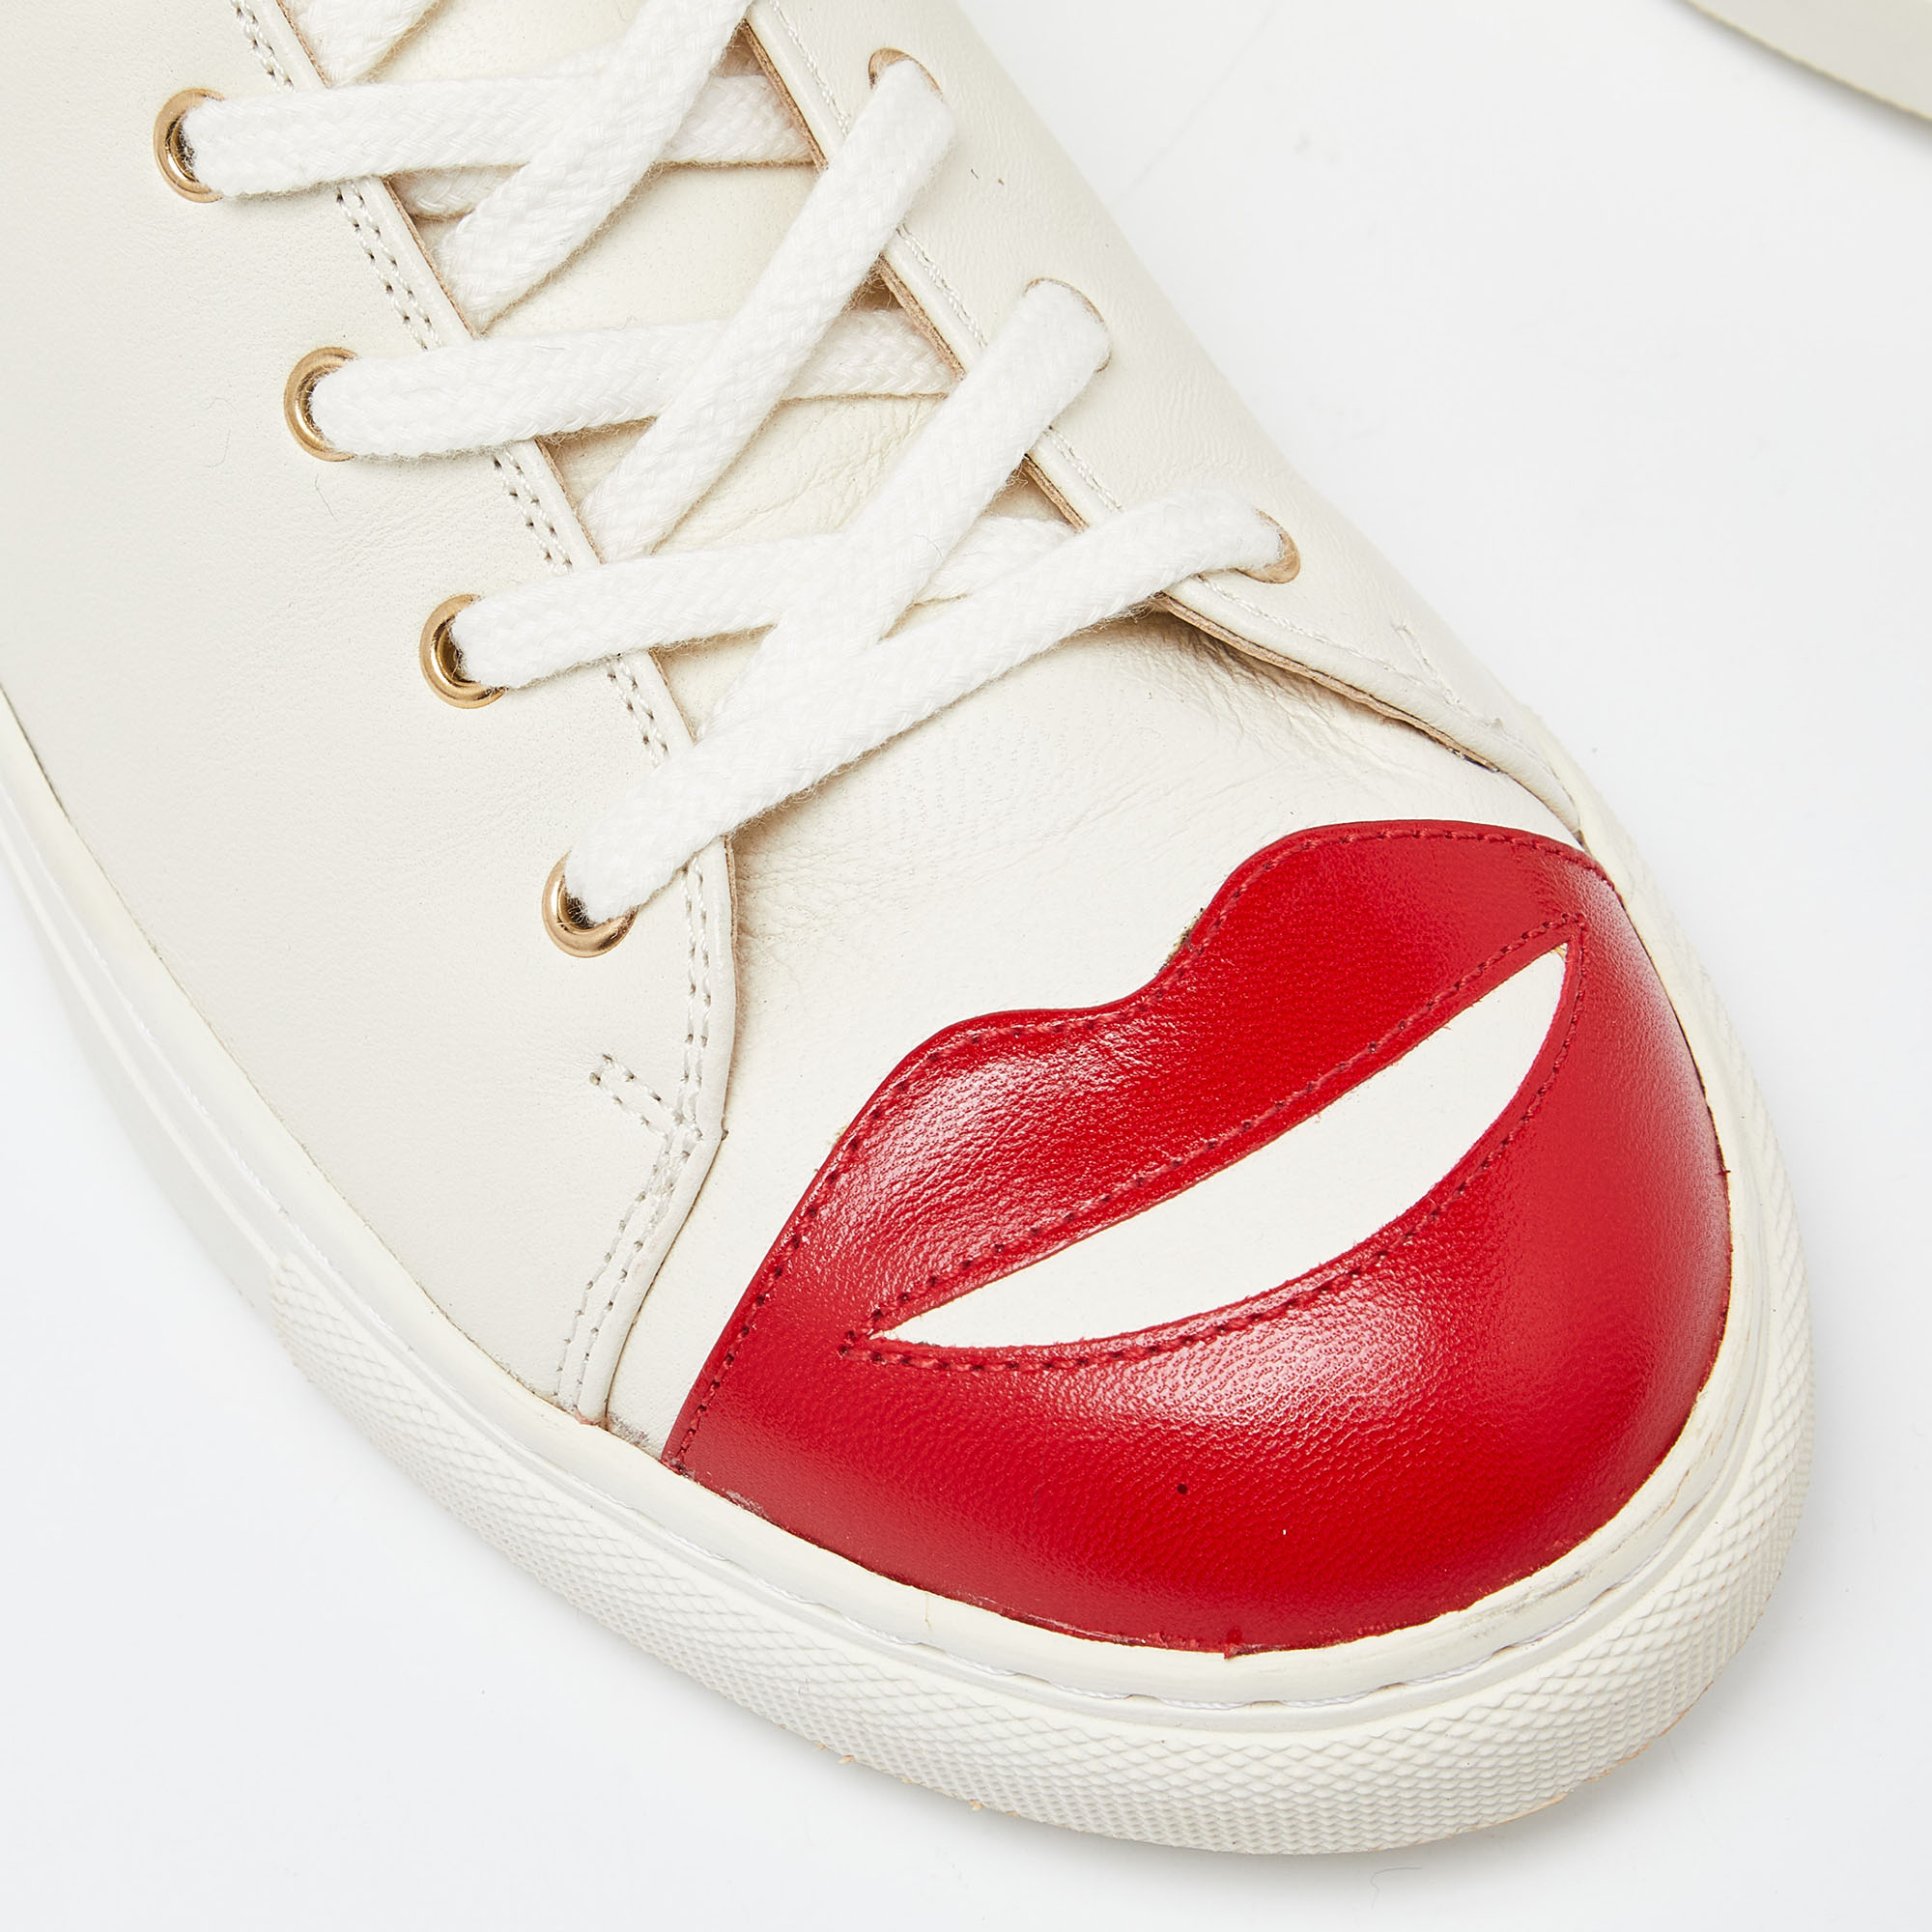 Charlotte Olympia White Leather Kiss Me Low Top Sneakers Size 38